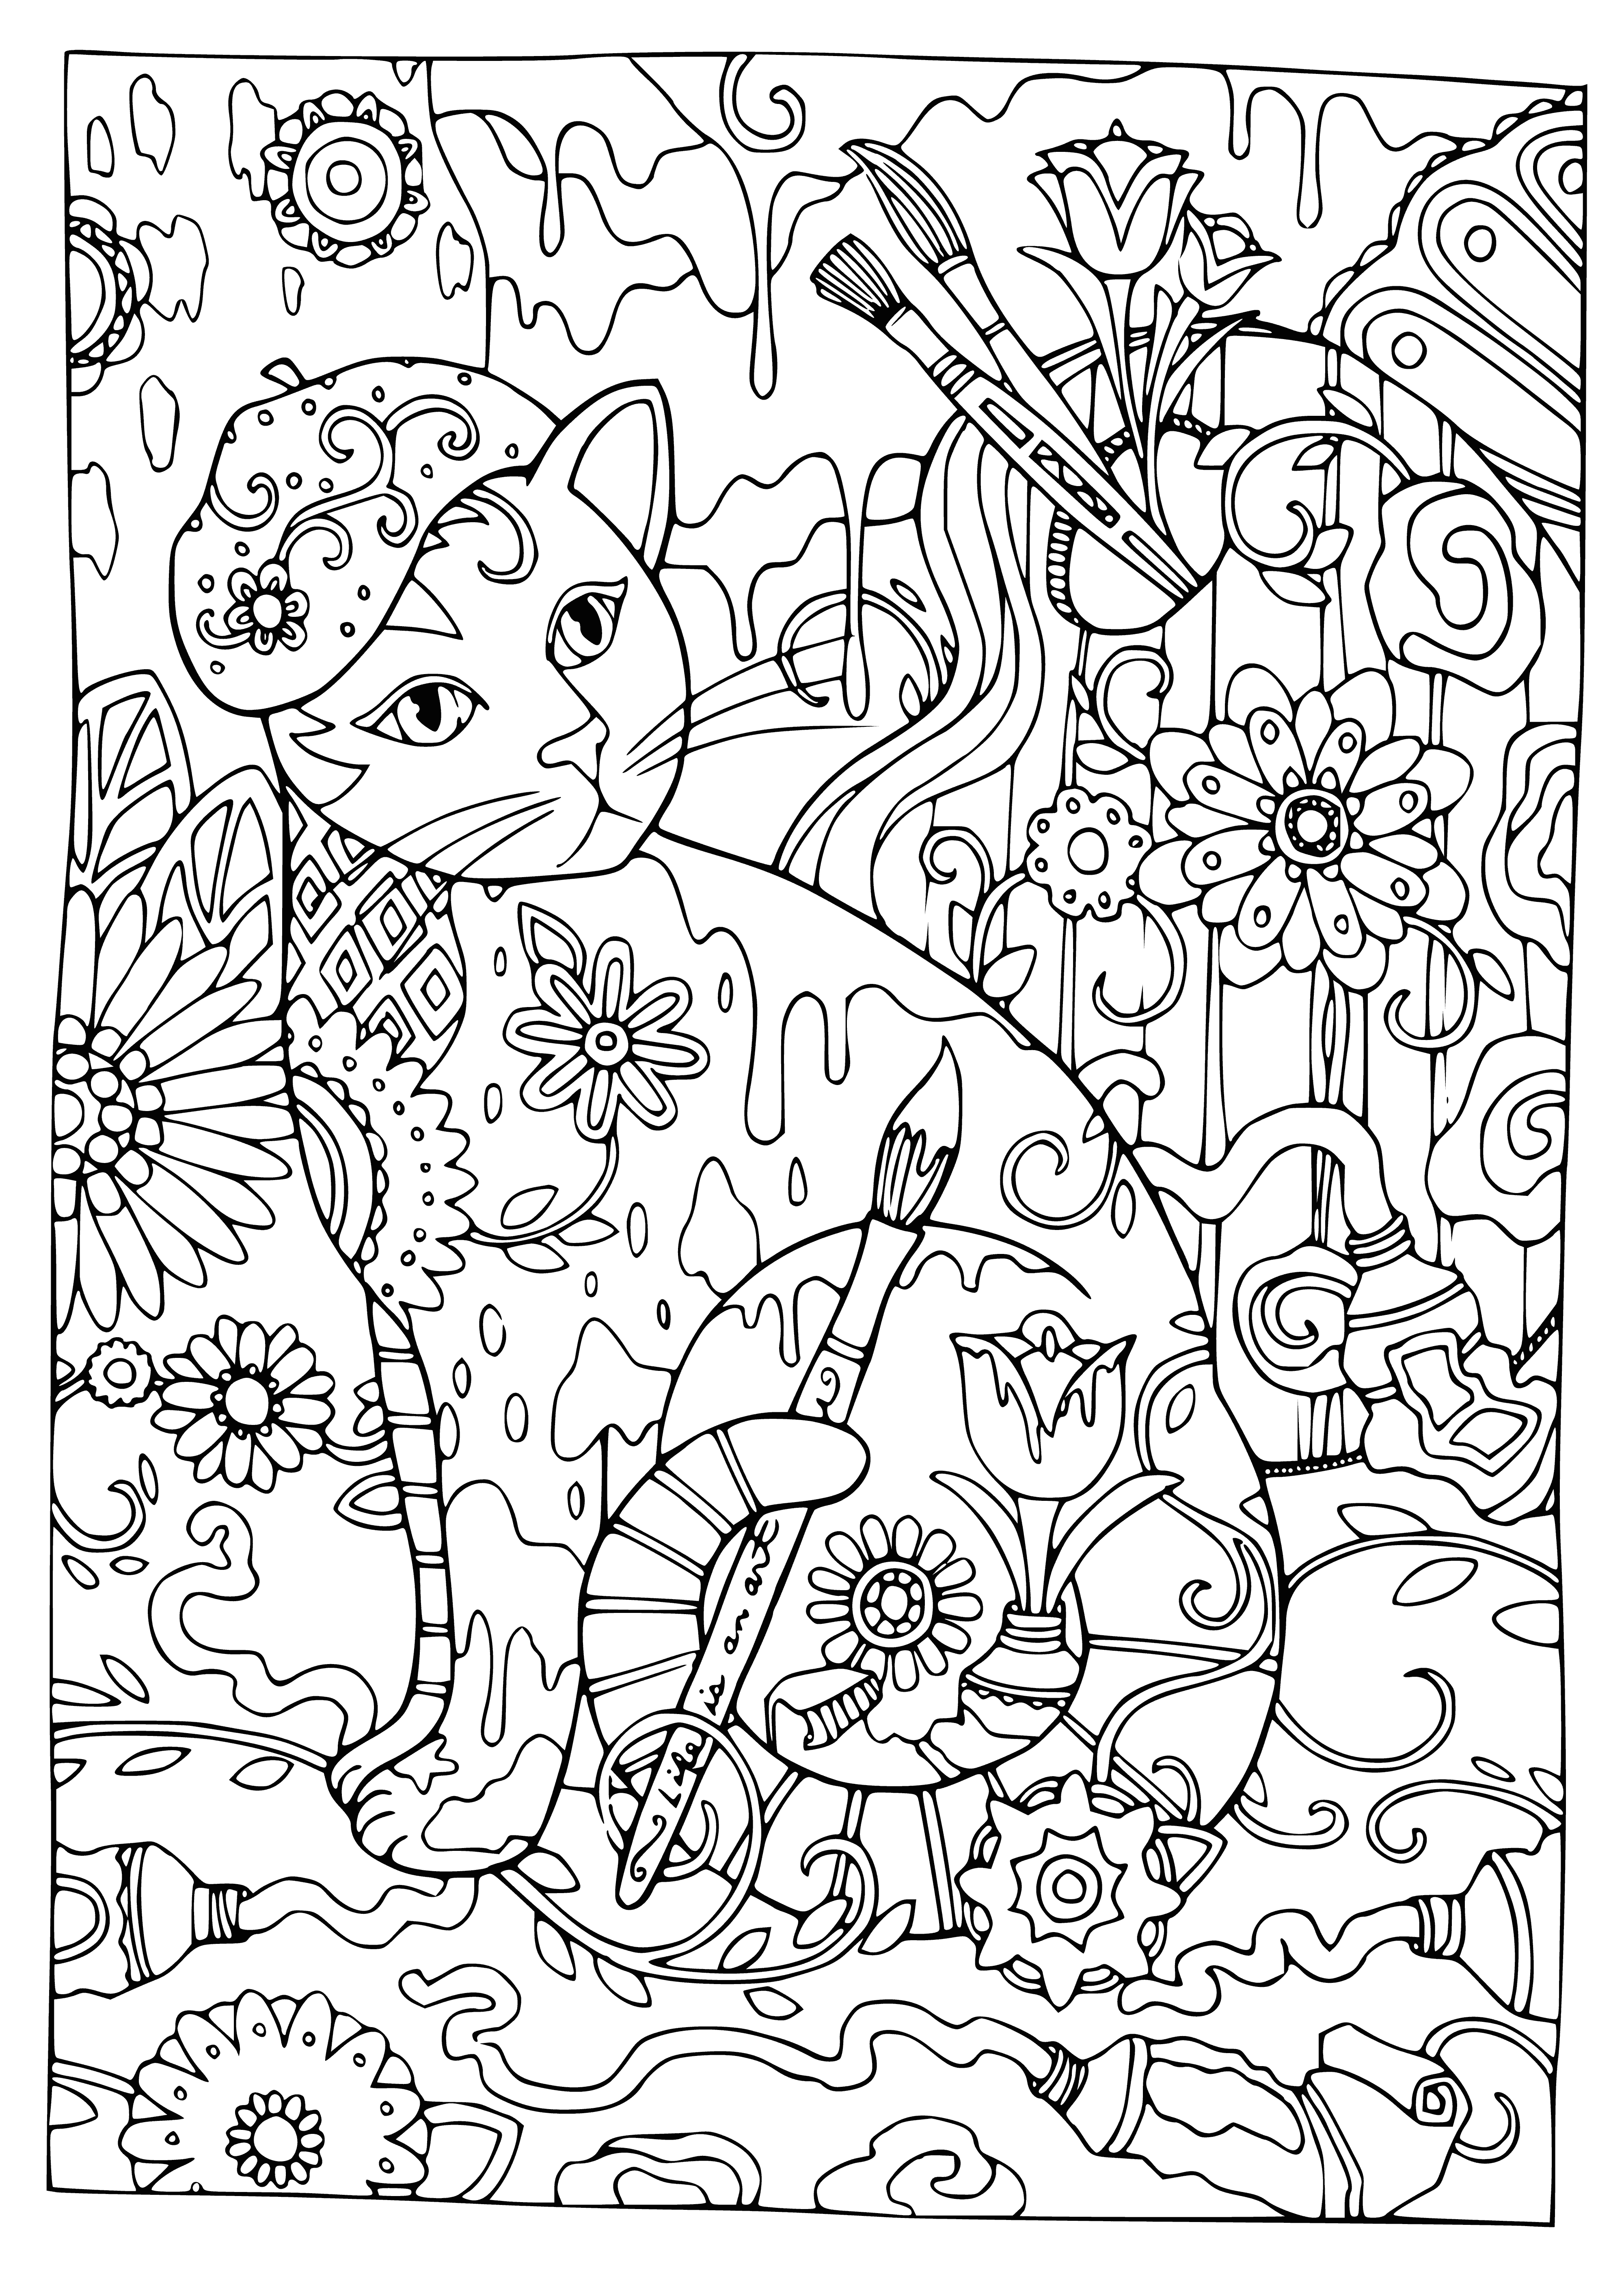 coloring page: Cat artist holds paintbrush to paint orange & white cat on blue background in Antistress Cats coloring page.